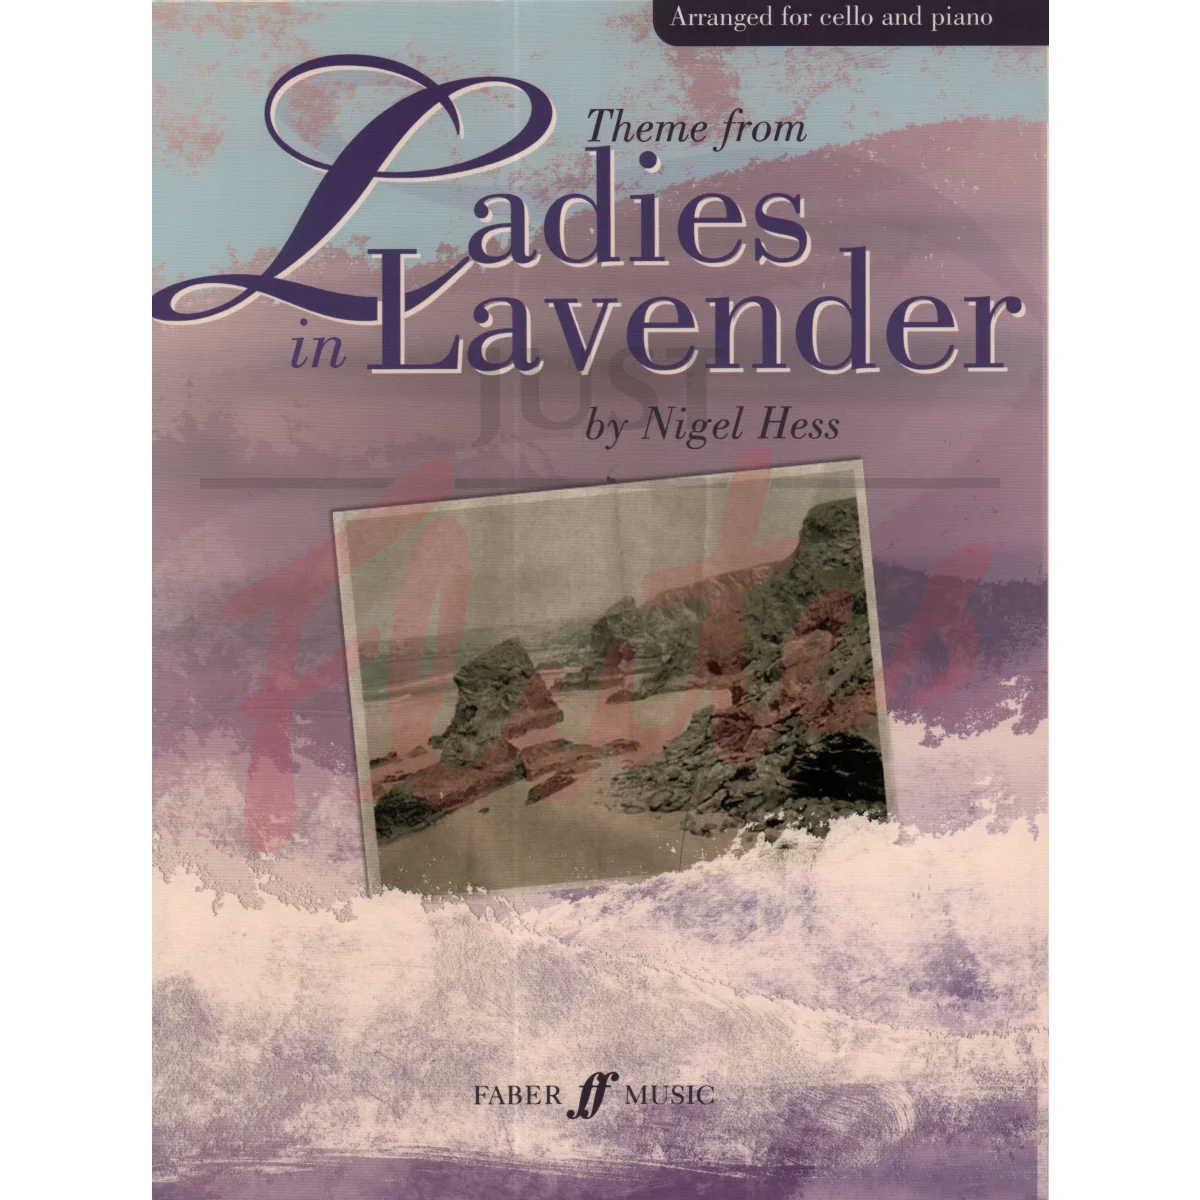 Ladies in Lavender for Cello and Piano